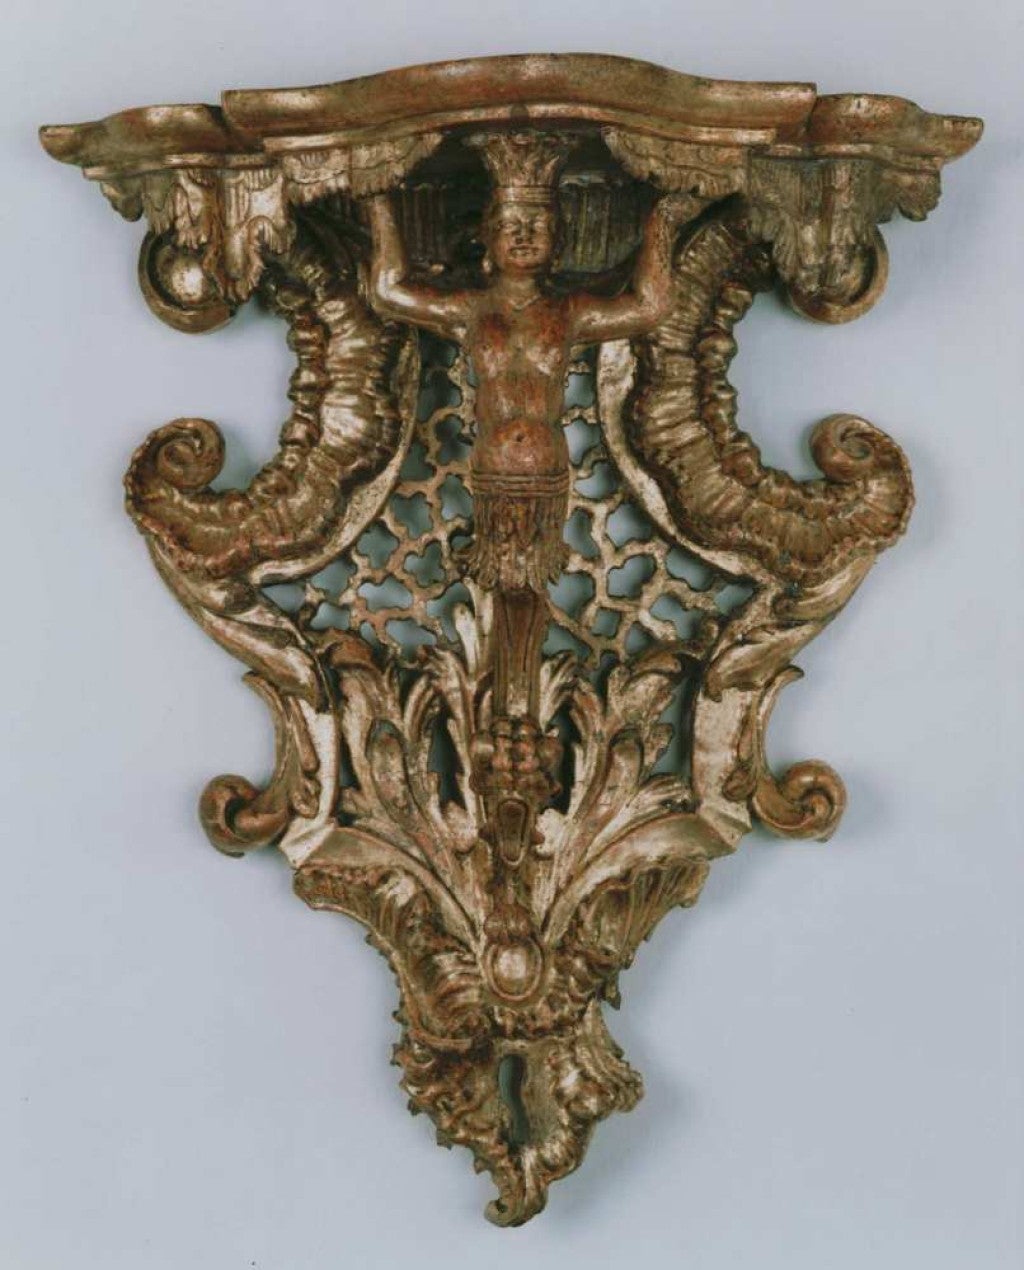 This highly sculptural console bracket is centered by a supporting herm figure in the guise of an American Indian with a crown of feathers. It was probably made as part of a series, each of which represented a continent, as was the fashion in the